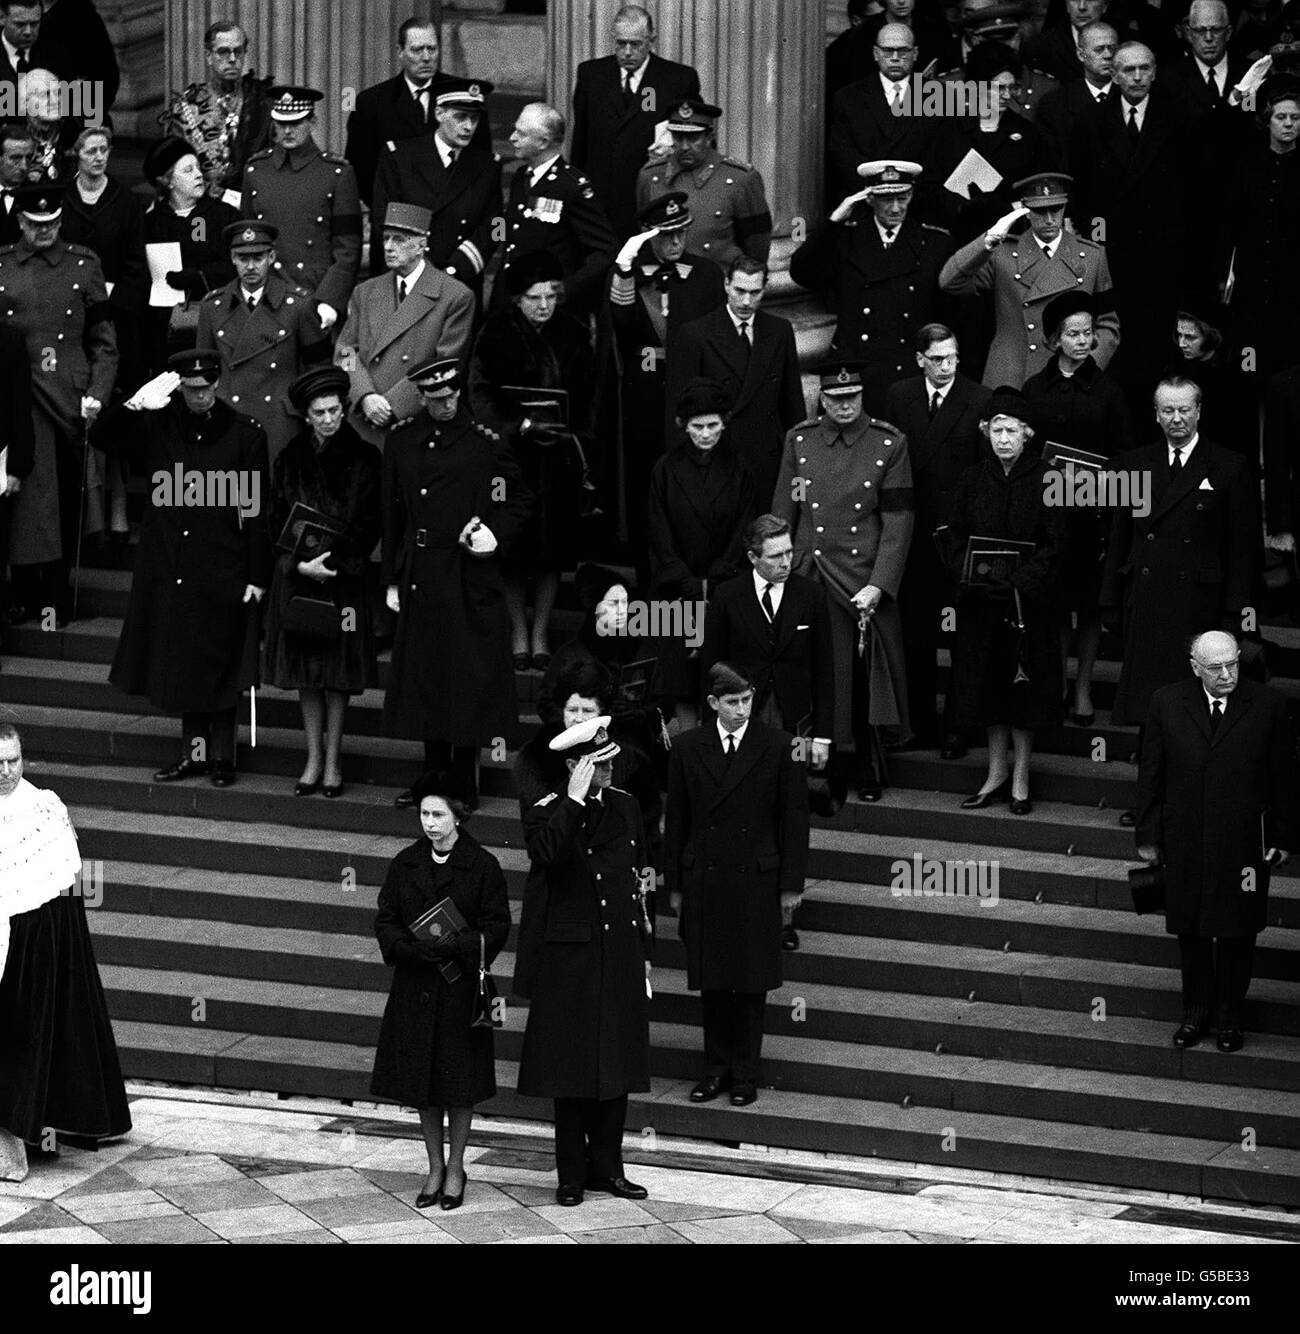 The Duke of Edinburgh and other distinguished mourners salute Sir Winston Churchill's coffin as it leaves St, Paul's Cathedral on the final stage of the State funeral. The Queen can be seen, foreground, beside the Duke. Stock Photo